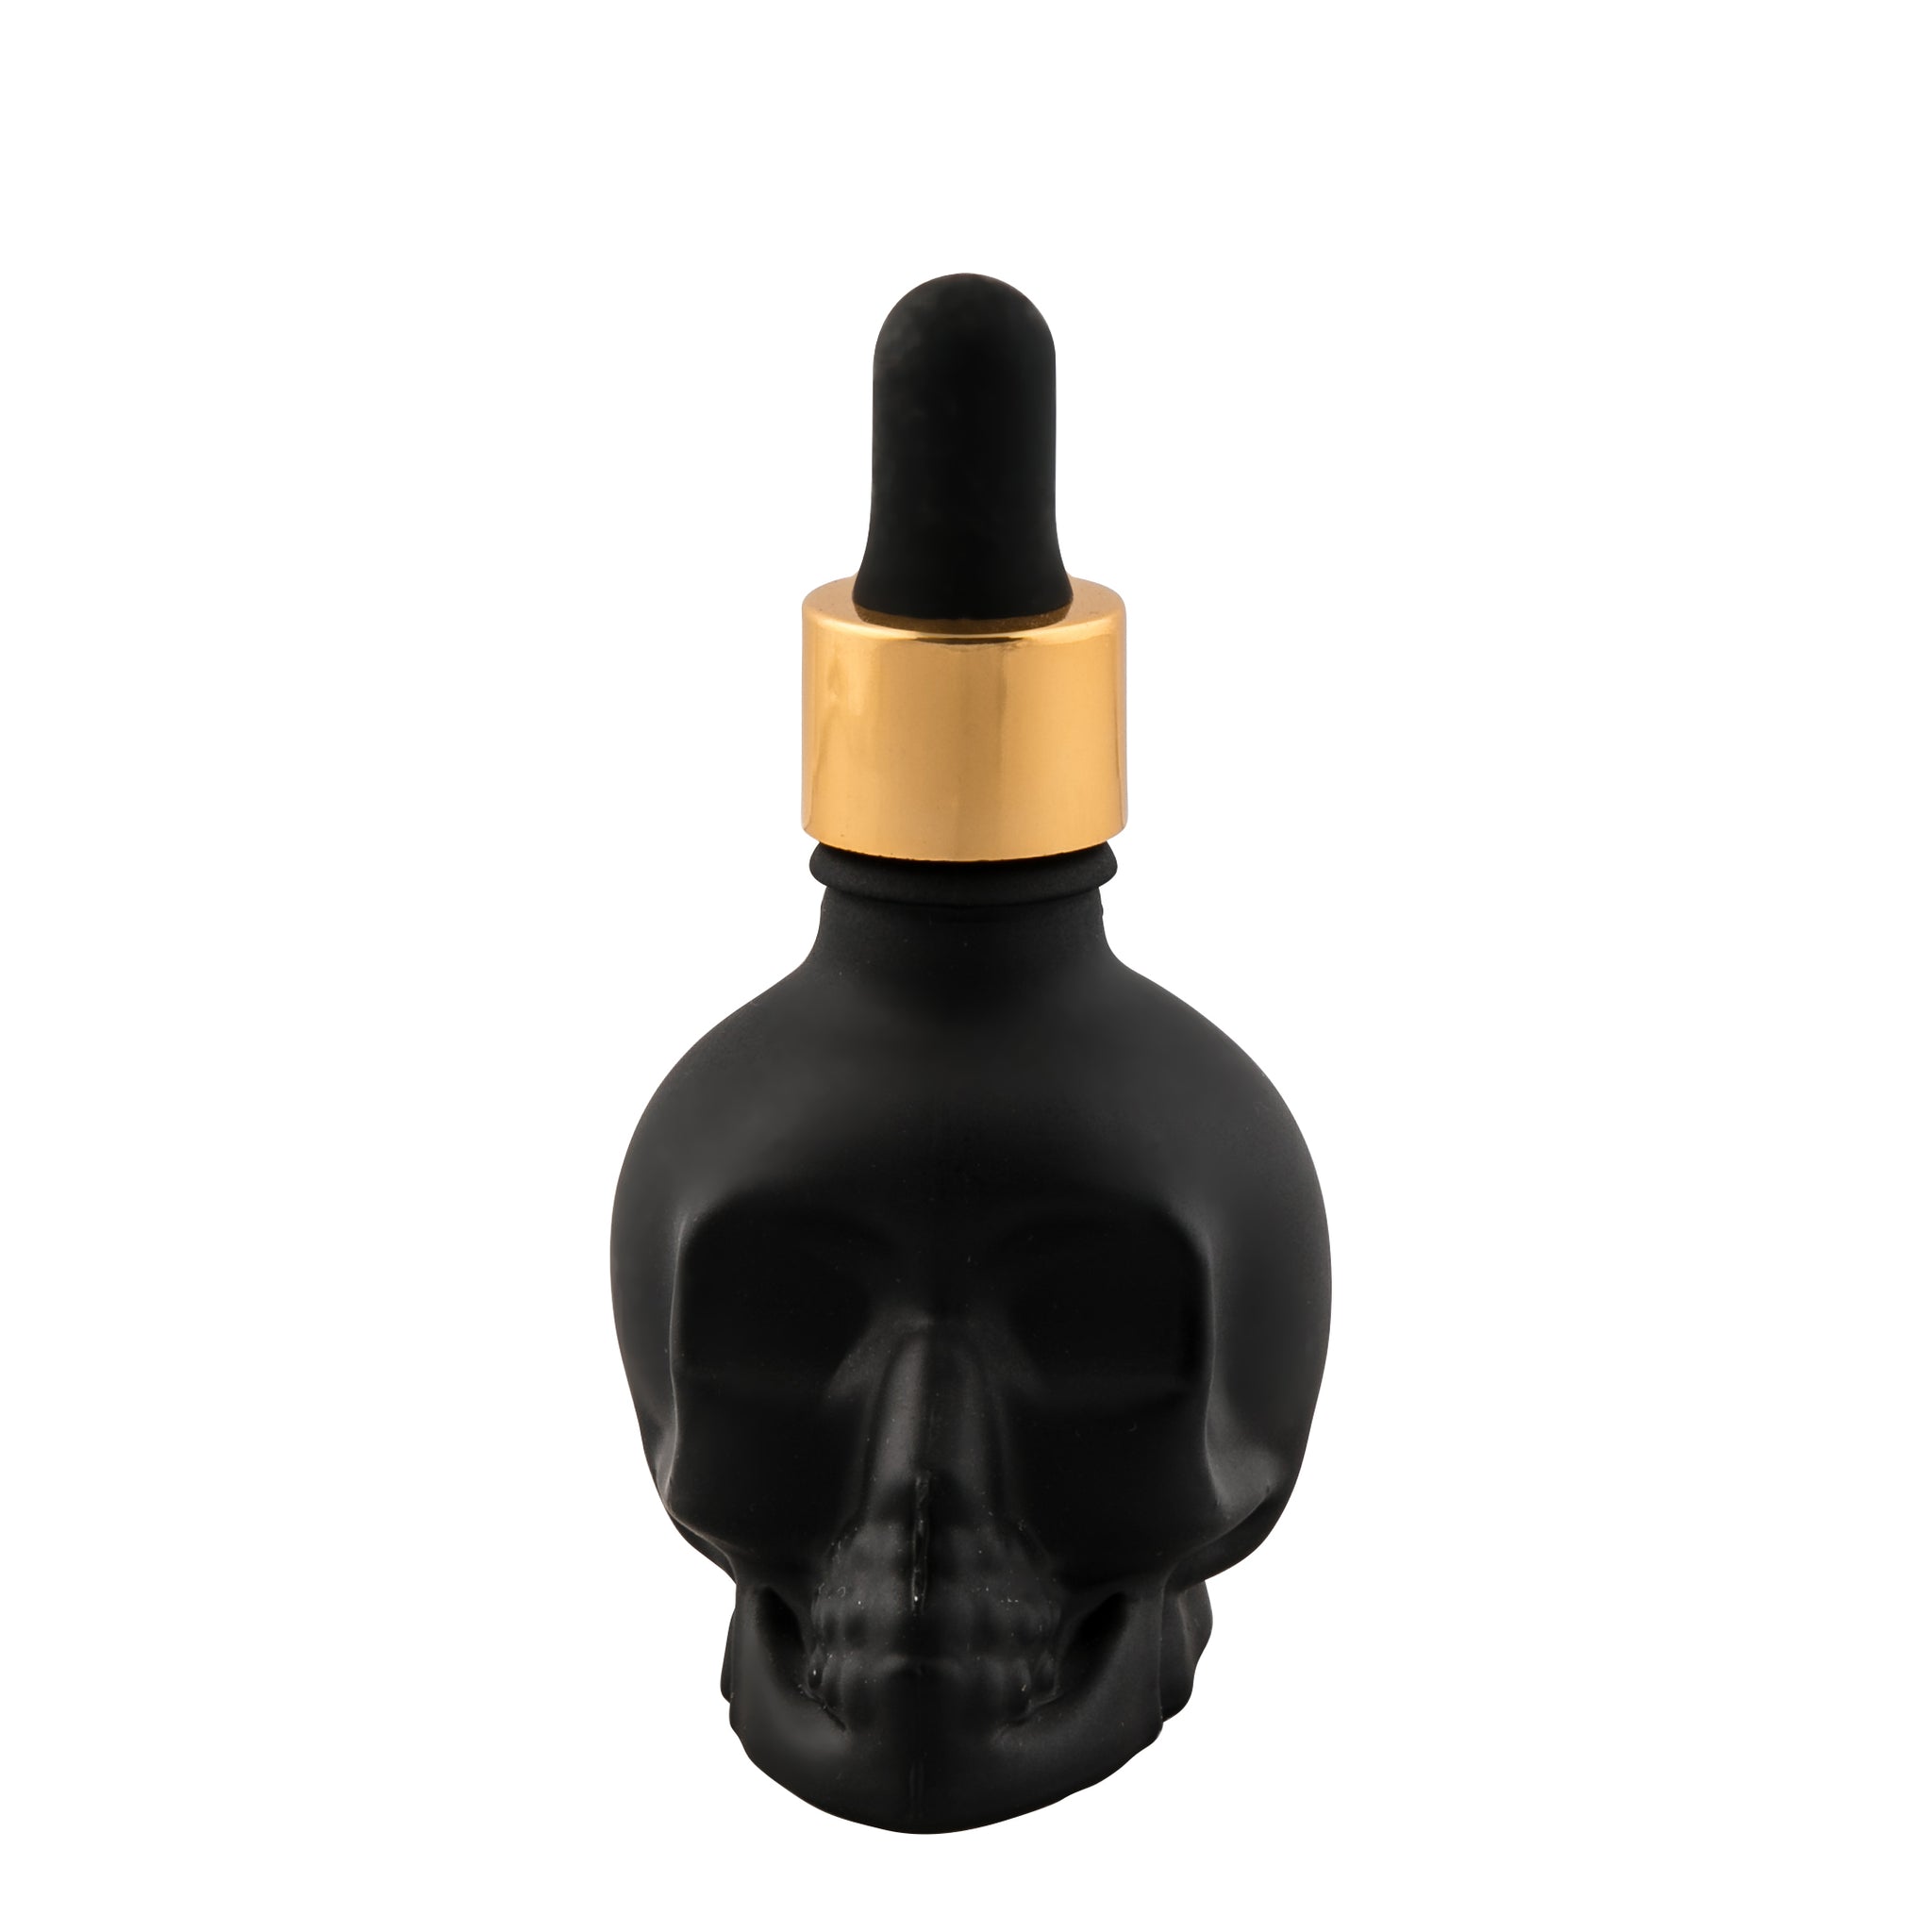 Skull Bitters Bottle in black, white and clear